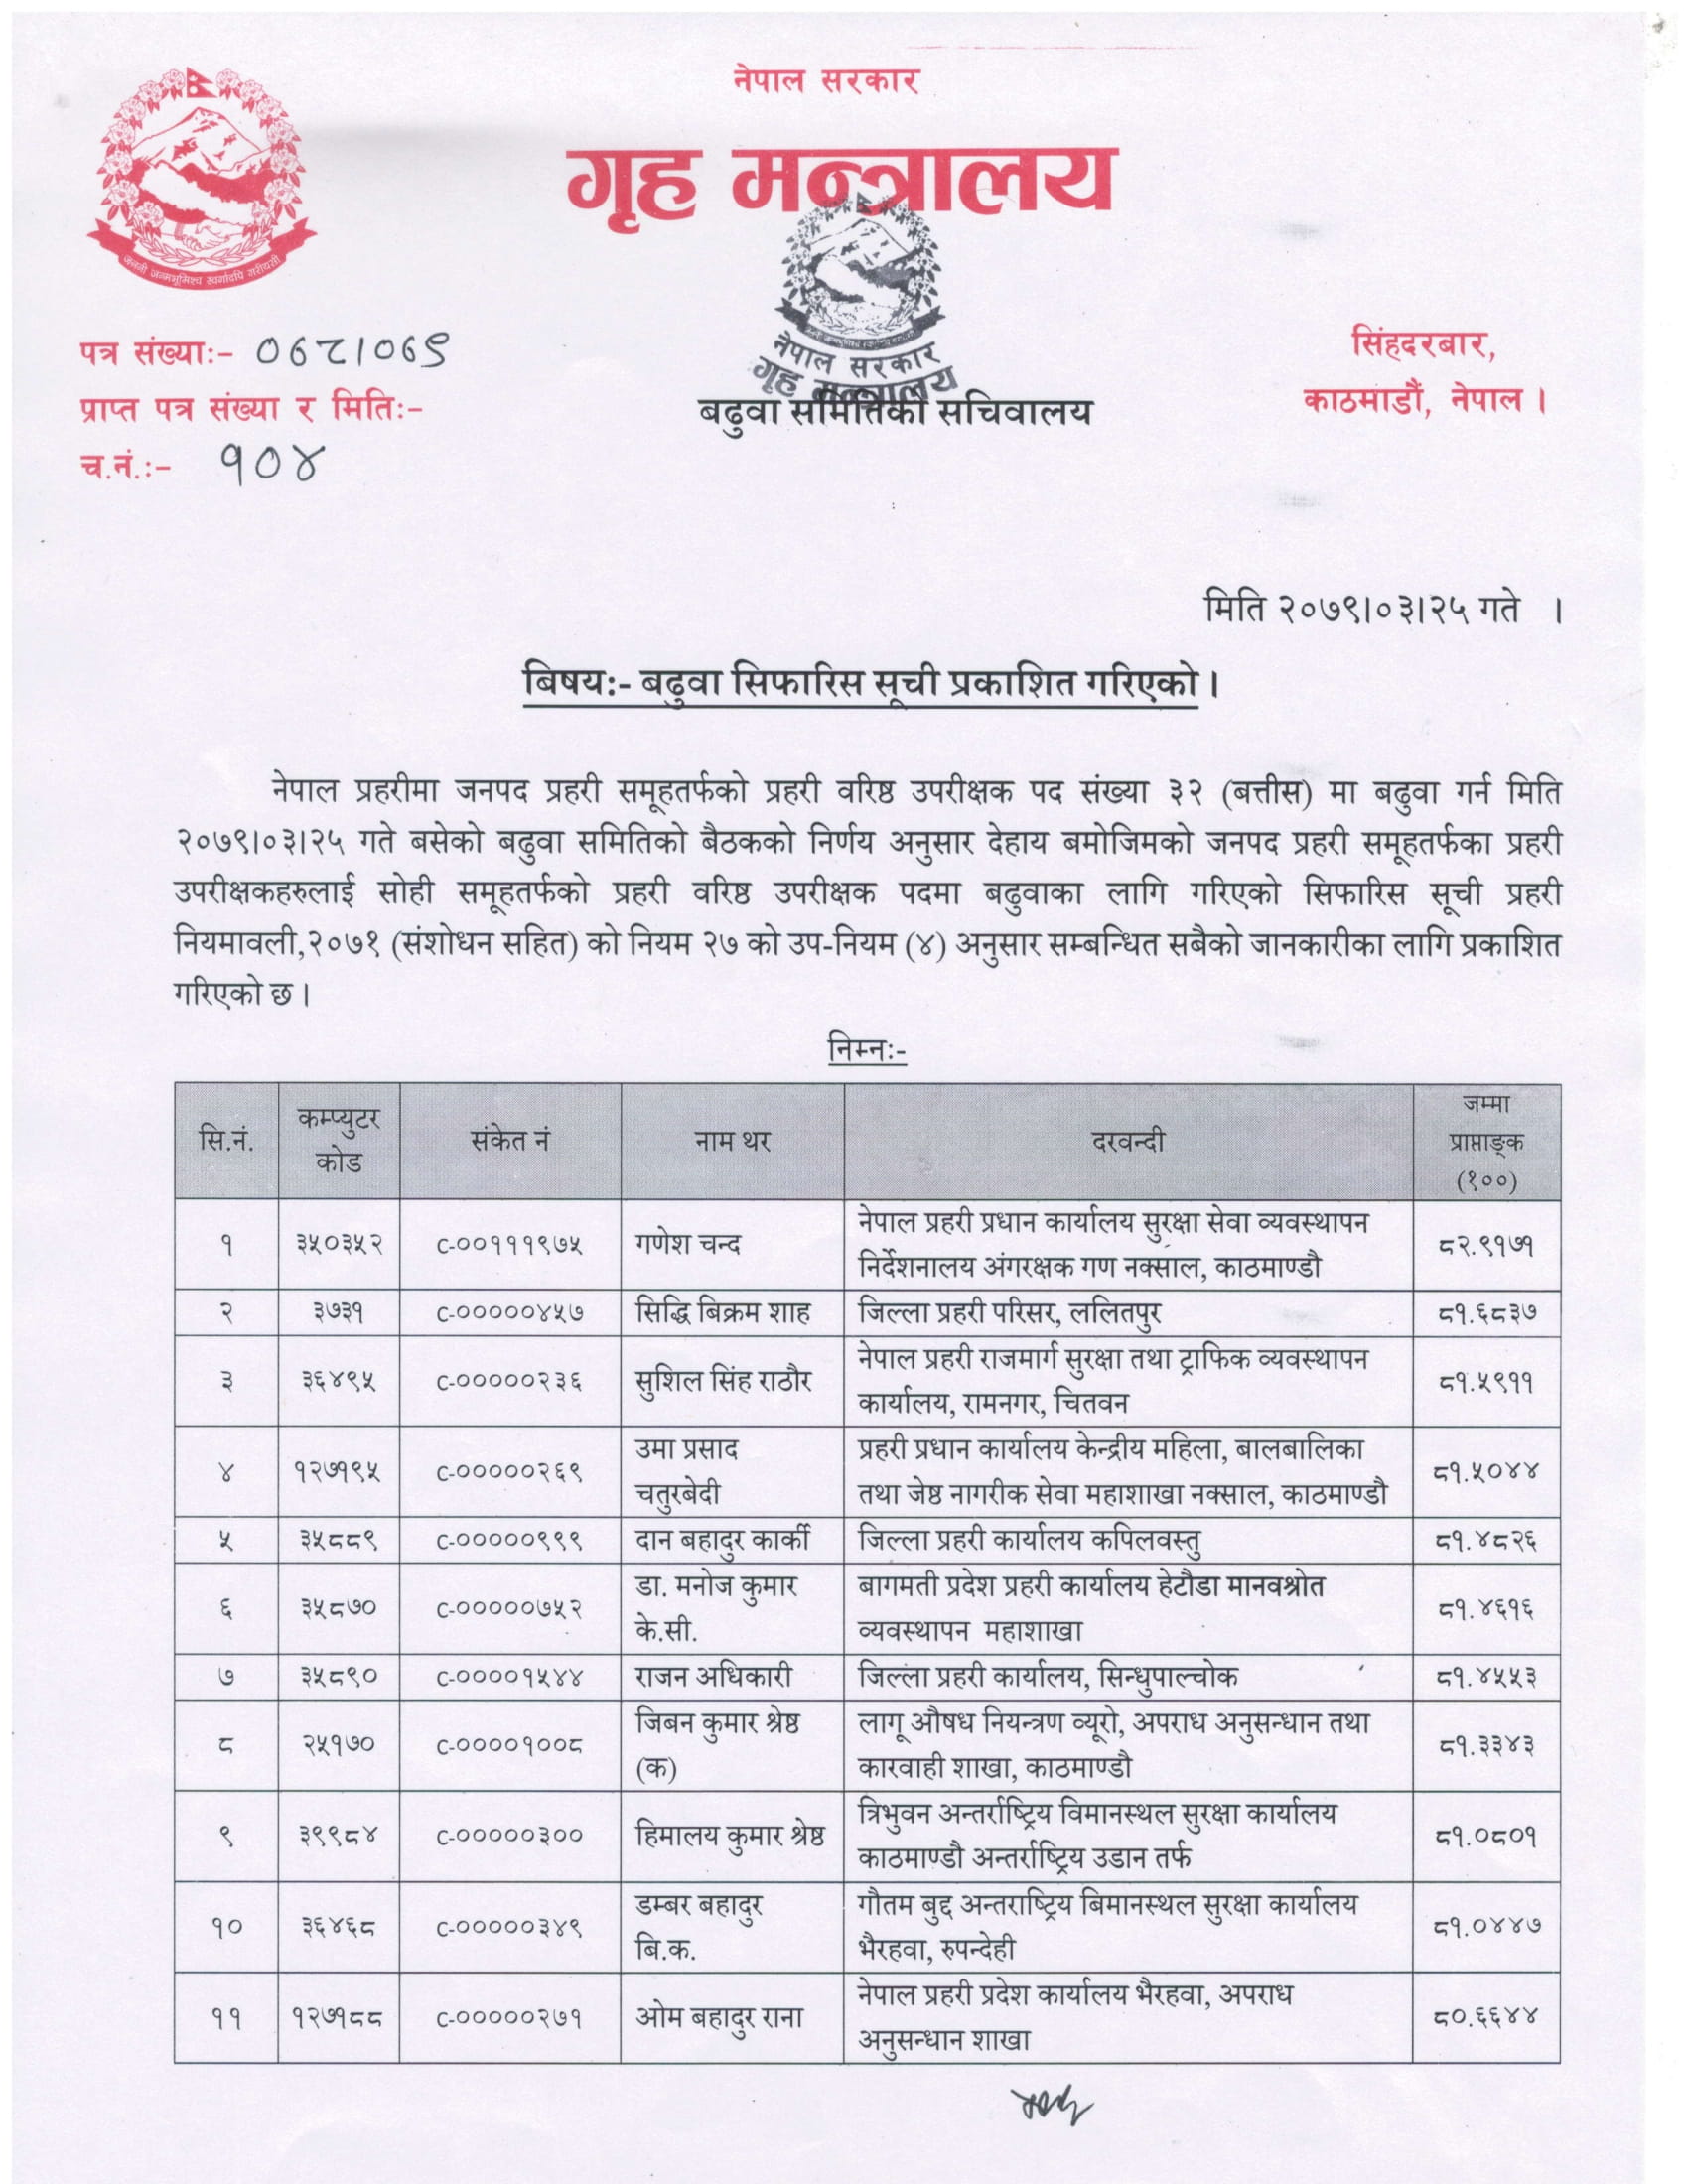 Nepal Police SSP Promotion Recommend List